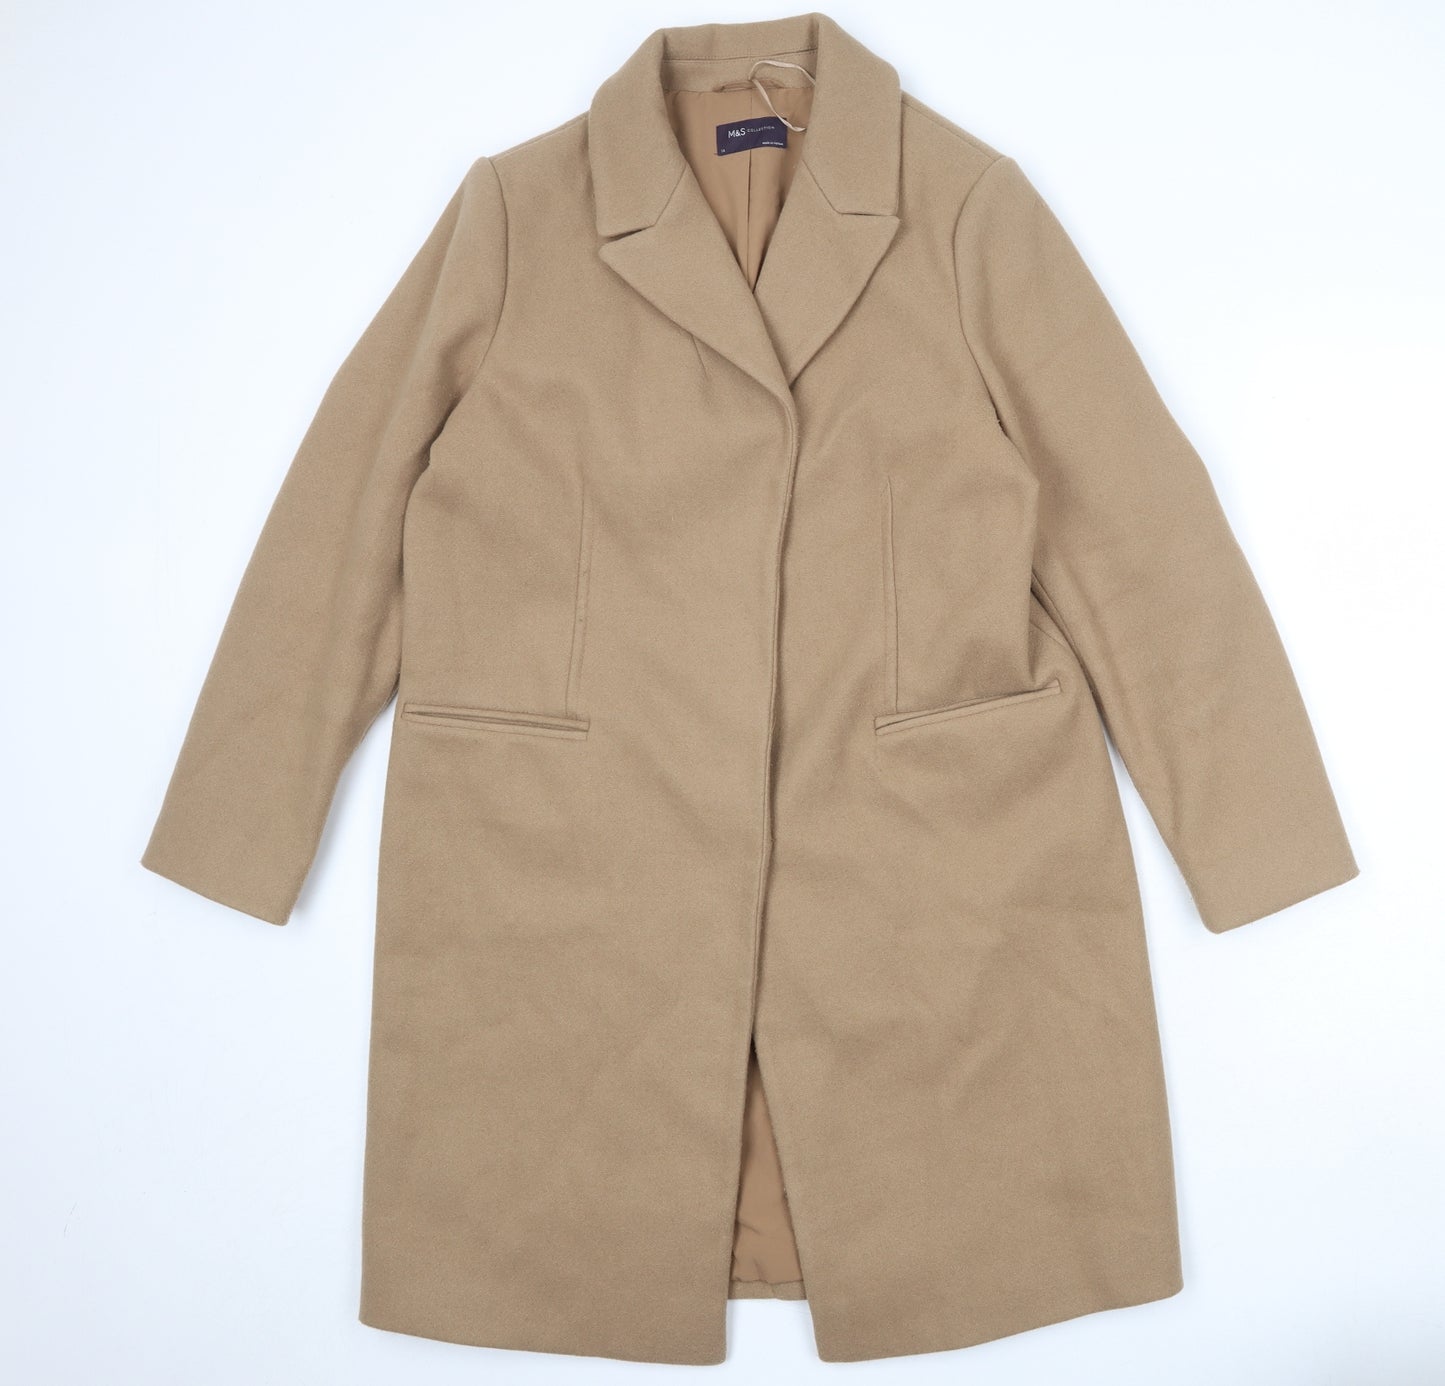 Marks and Spencer Womens Beige Overcoat Coat Size 14 Snap